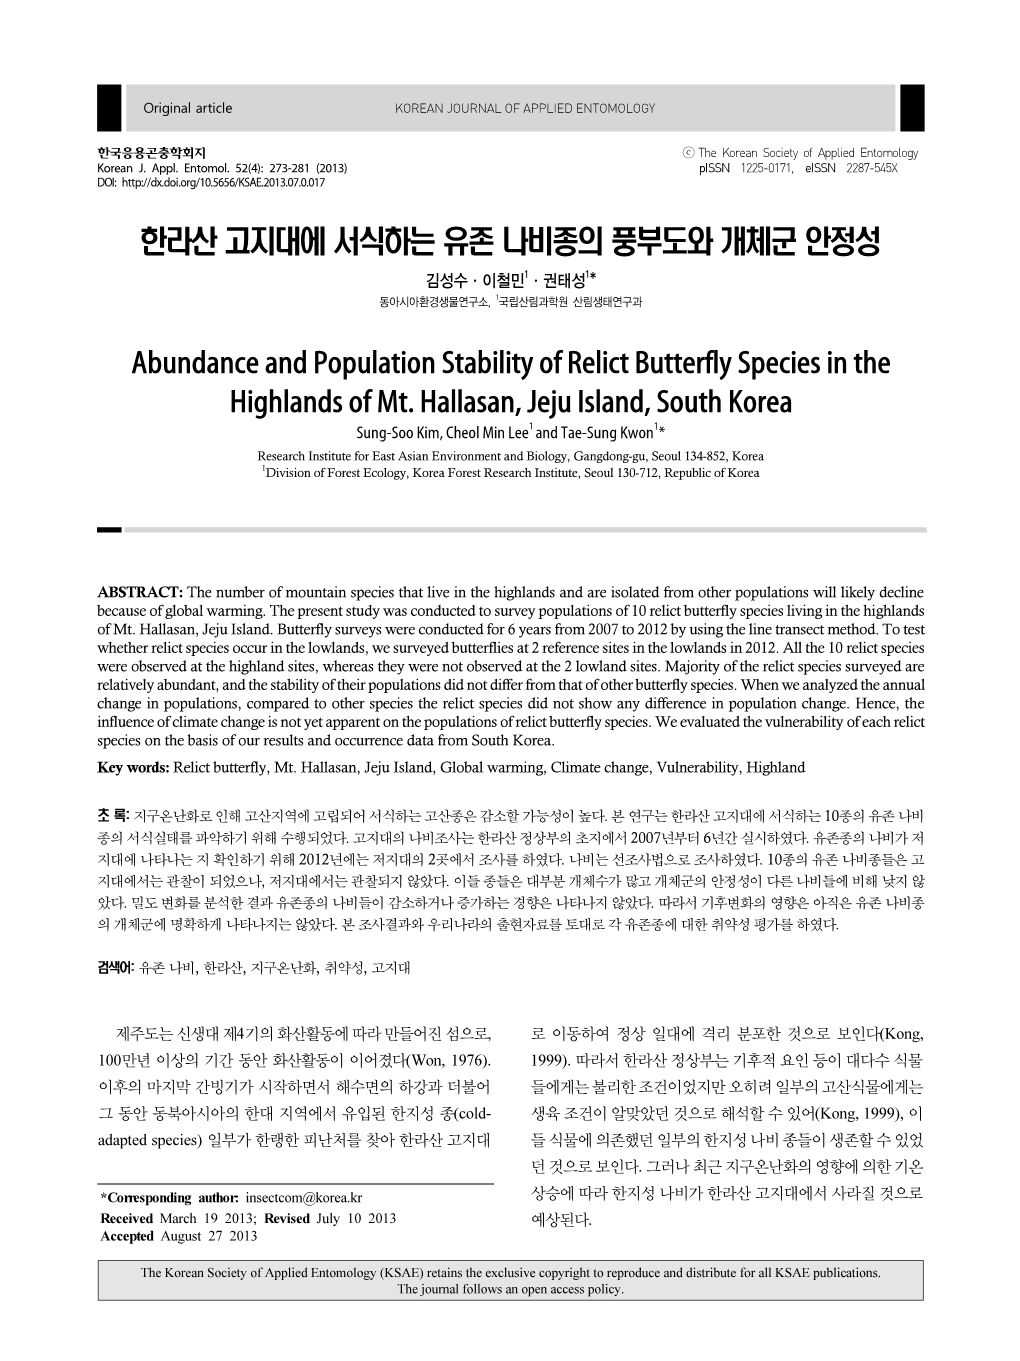 Abundance and Population Stability of Relict Butterfly Species in the Highlands of Mt